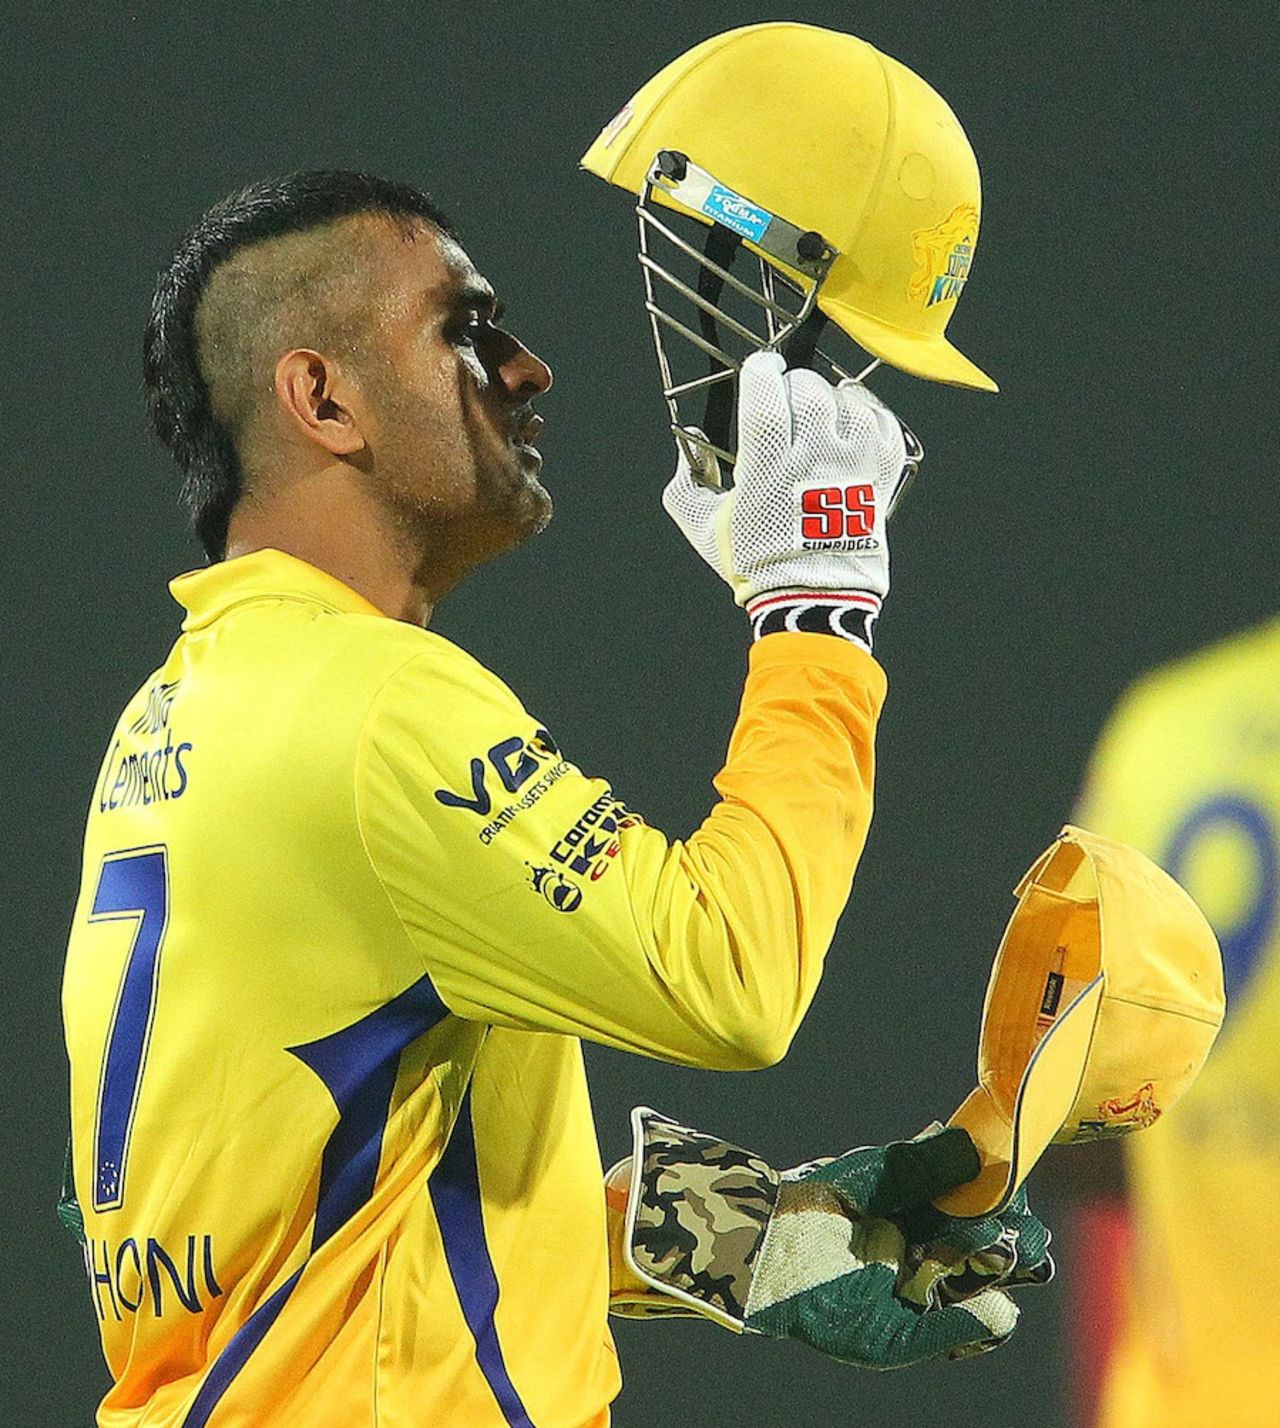 MS Dhoni sported a mohawk when he took the field on his homeground, Chennai Super Kings v Titans, Champions League 2013, Group B, Ranchi, September 22, 2013